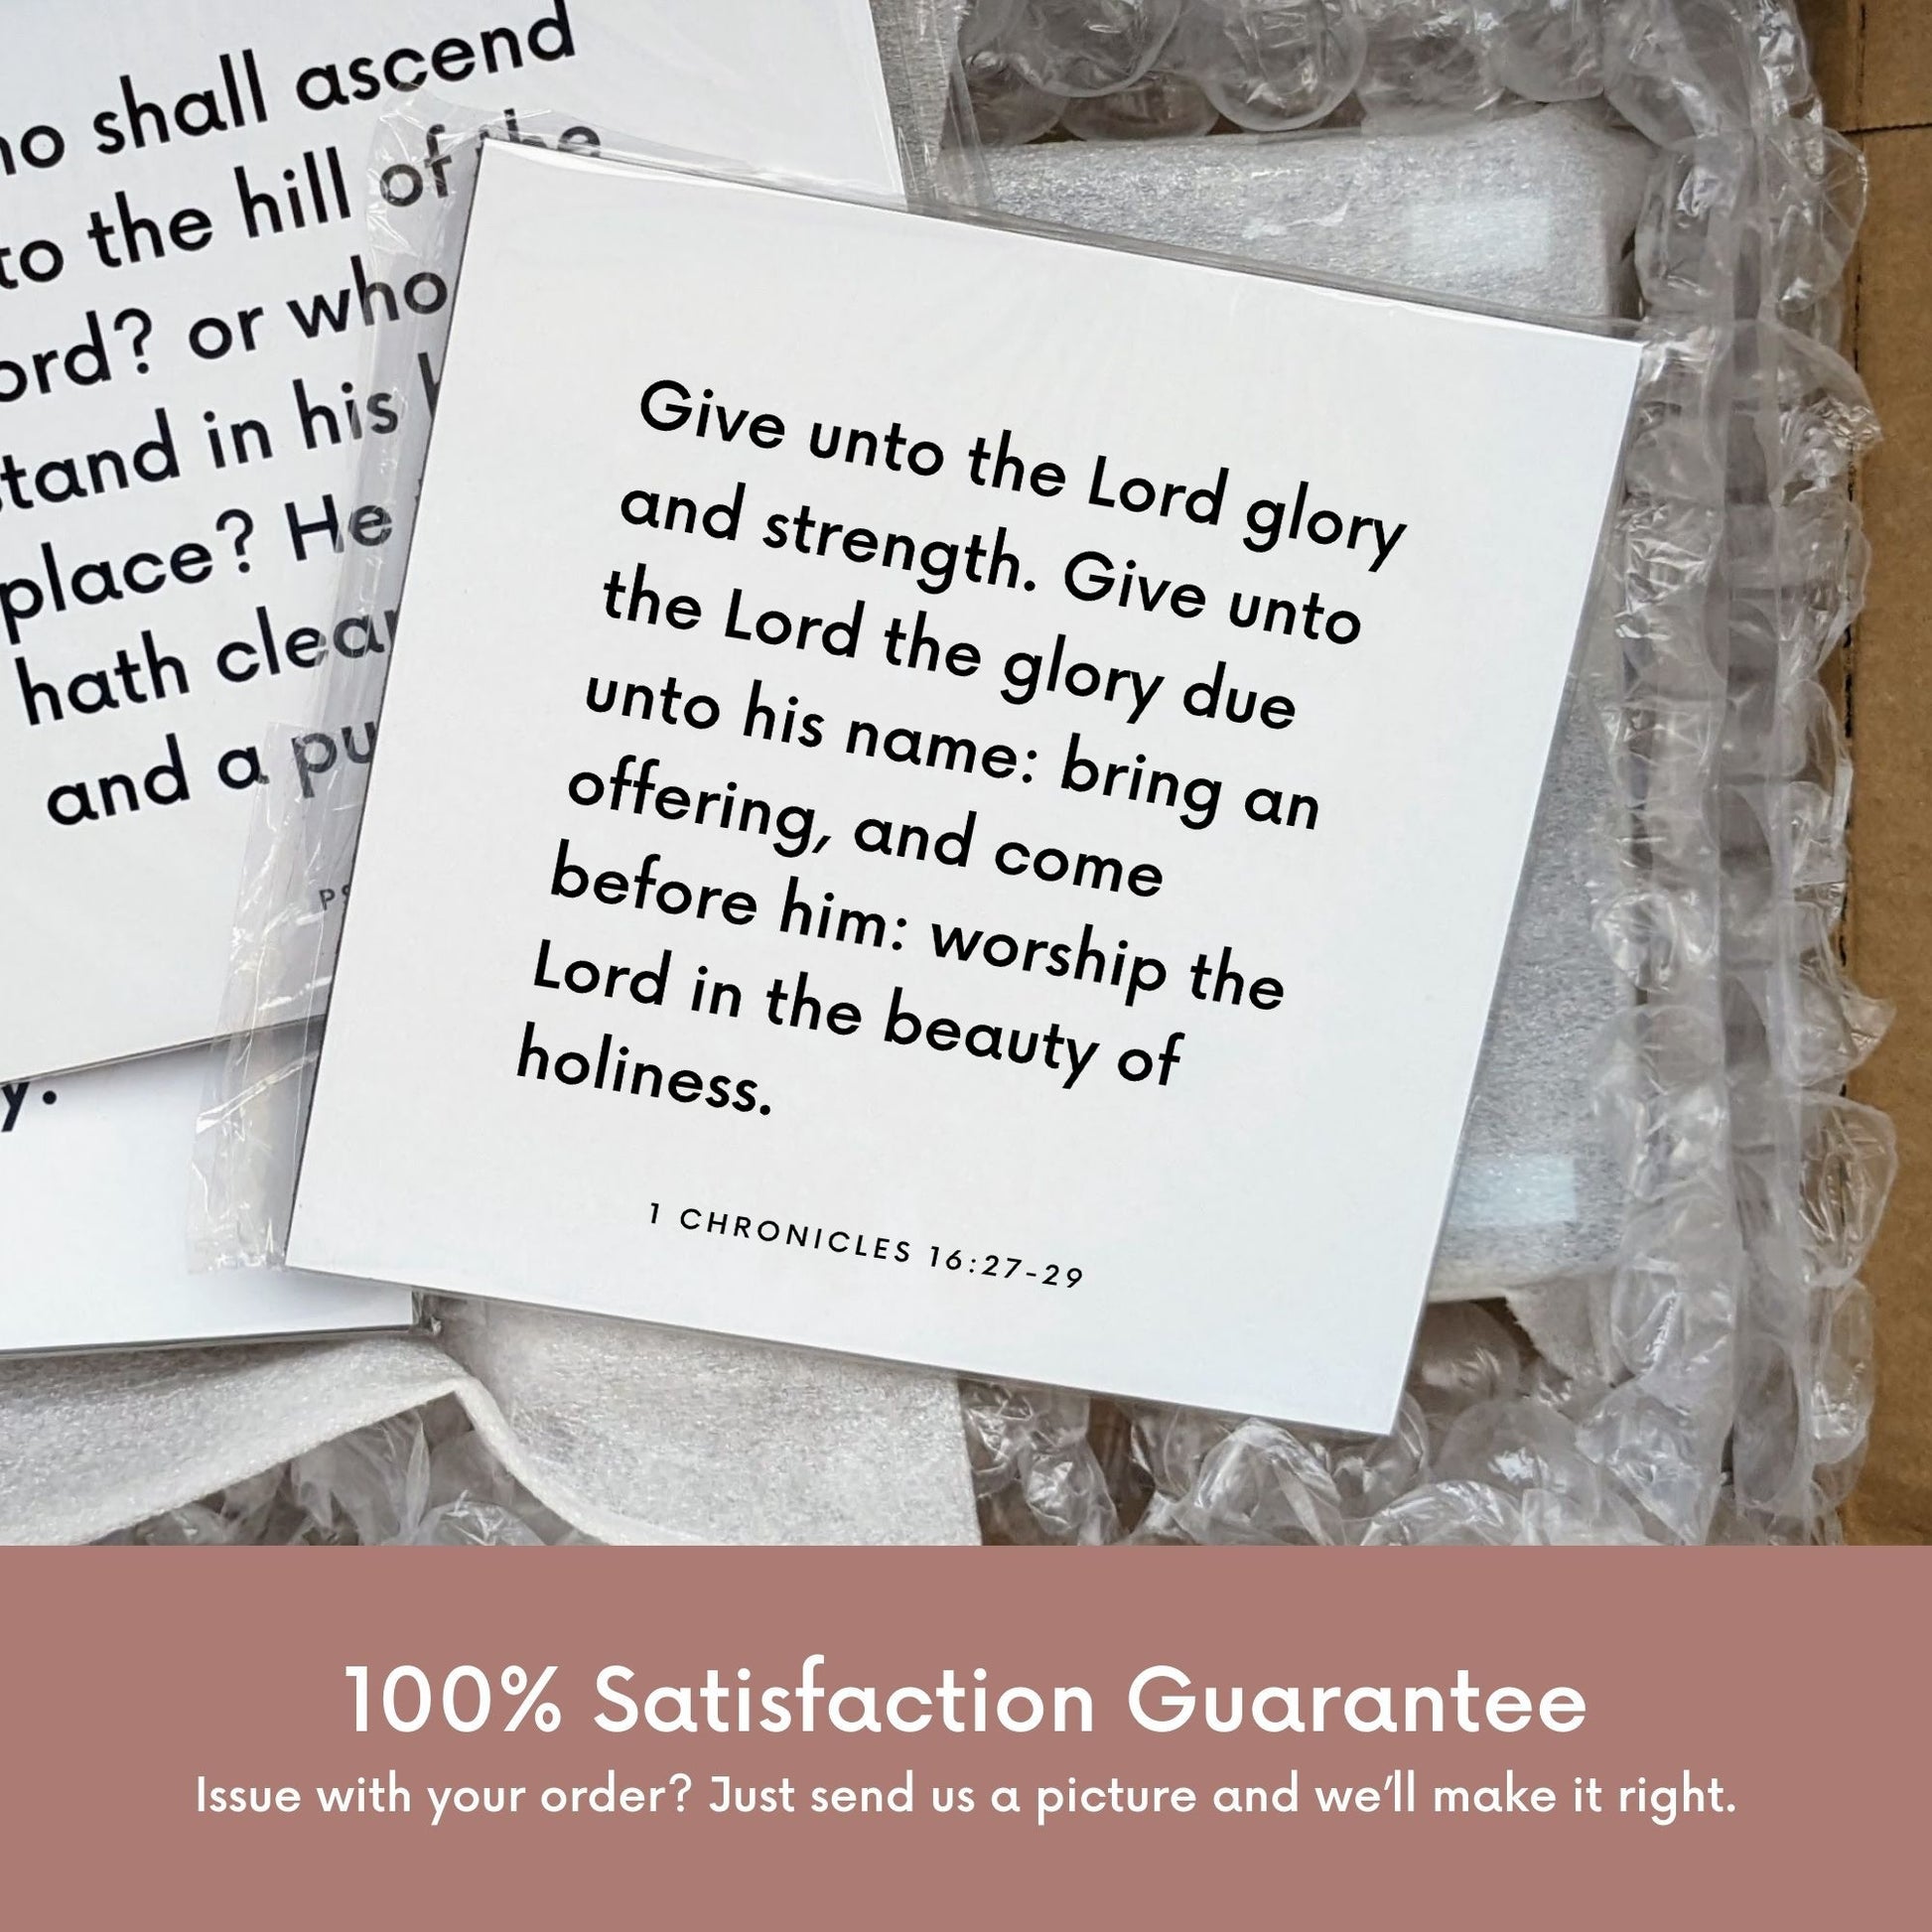 Shipping materials for scripture tile of 1 Chronicles 16:27-29 - "Give unto the Lord glory and strength"